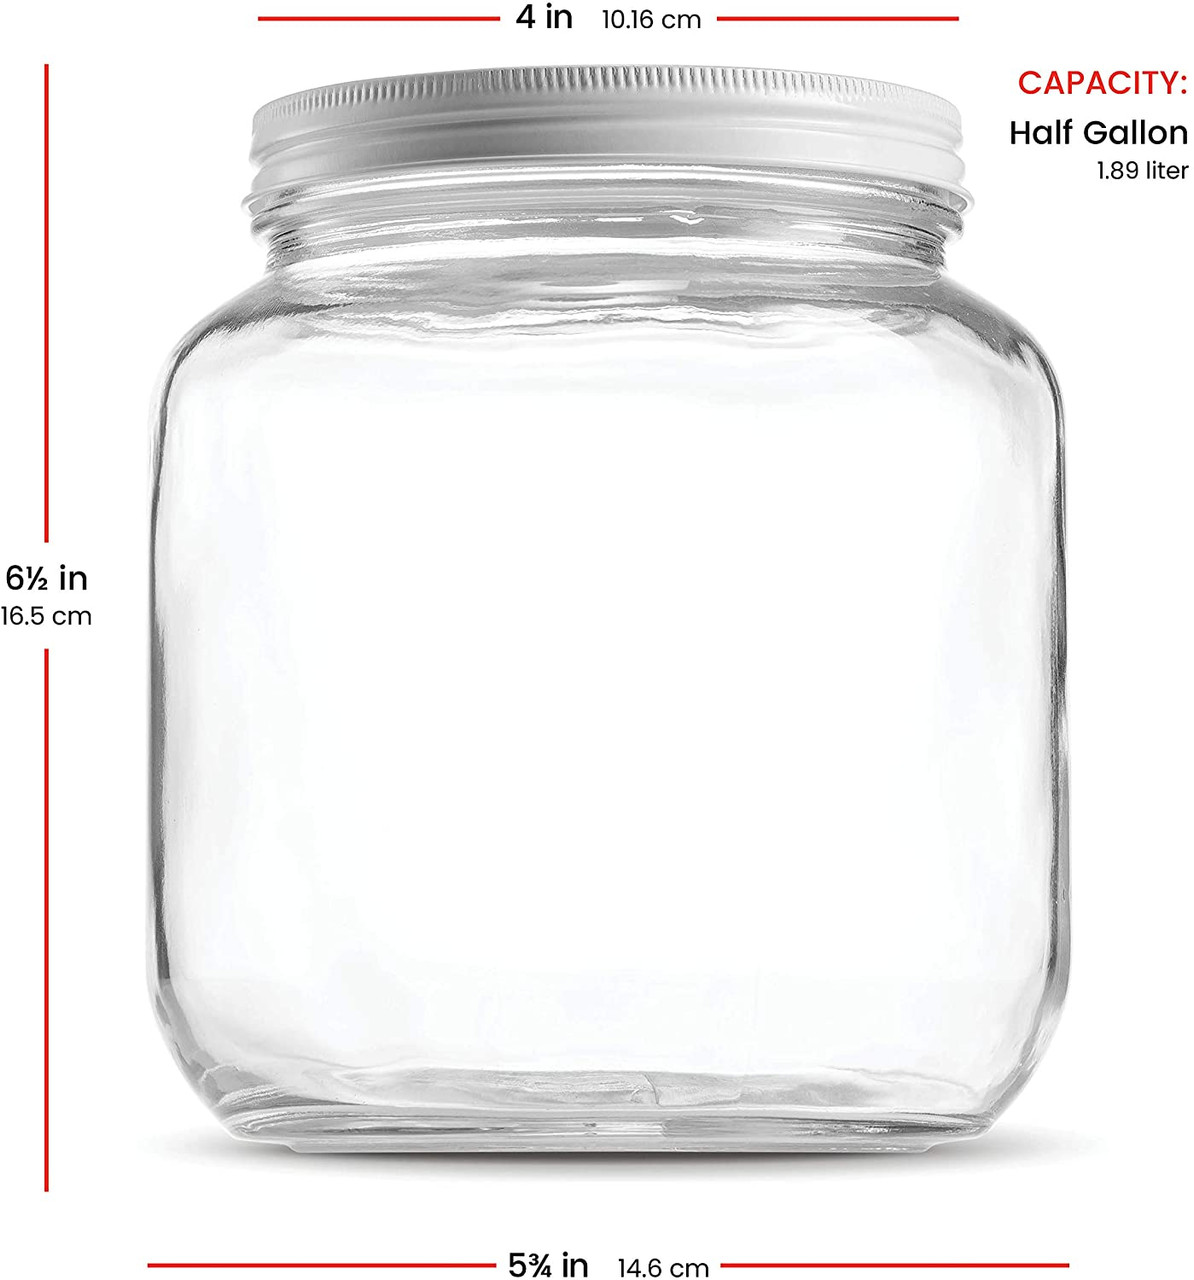 Kitchentoolz 2 Pack - 1 Gallon Glass Mason Jar Wide Mouth with Airtight Metal Lid - Safe for Fermenting Kombucha Kefir - Pickling, Storing